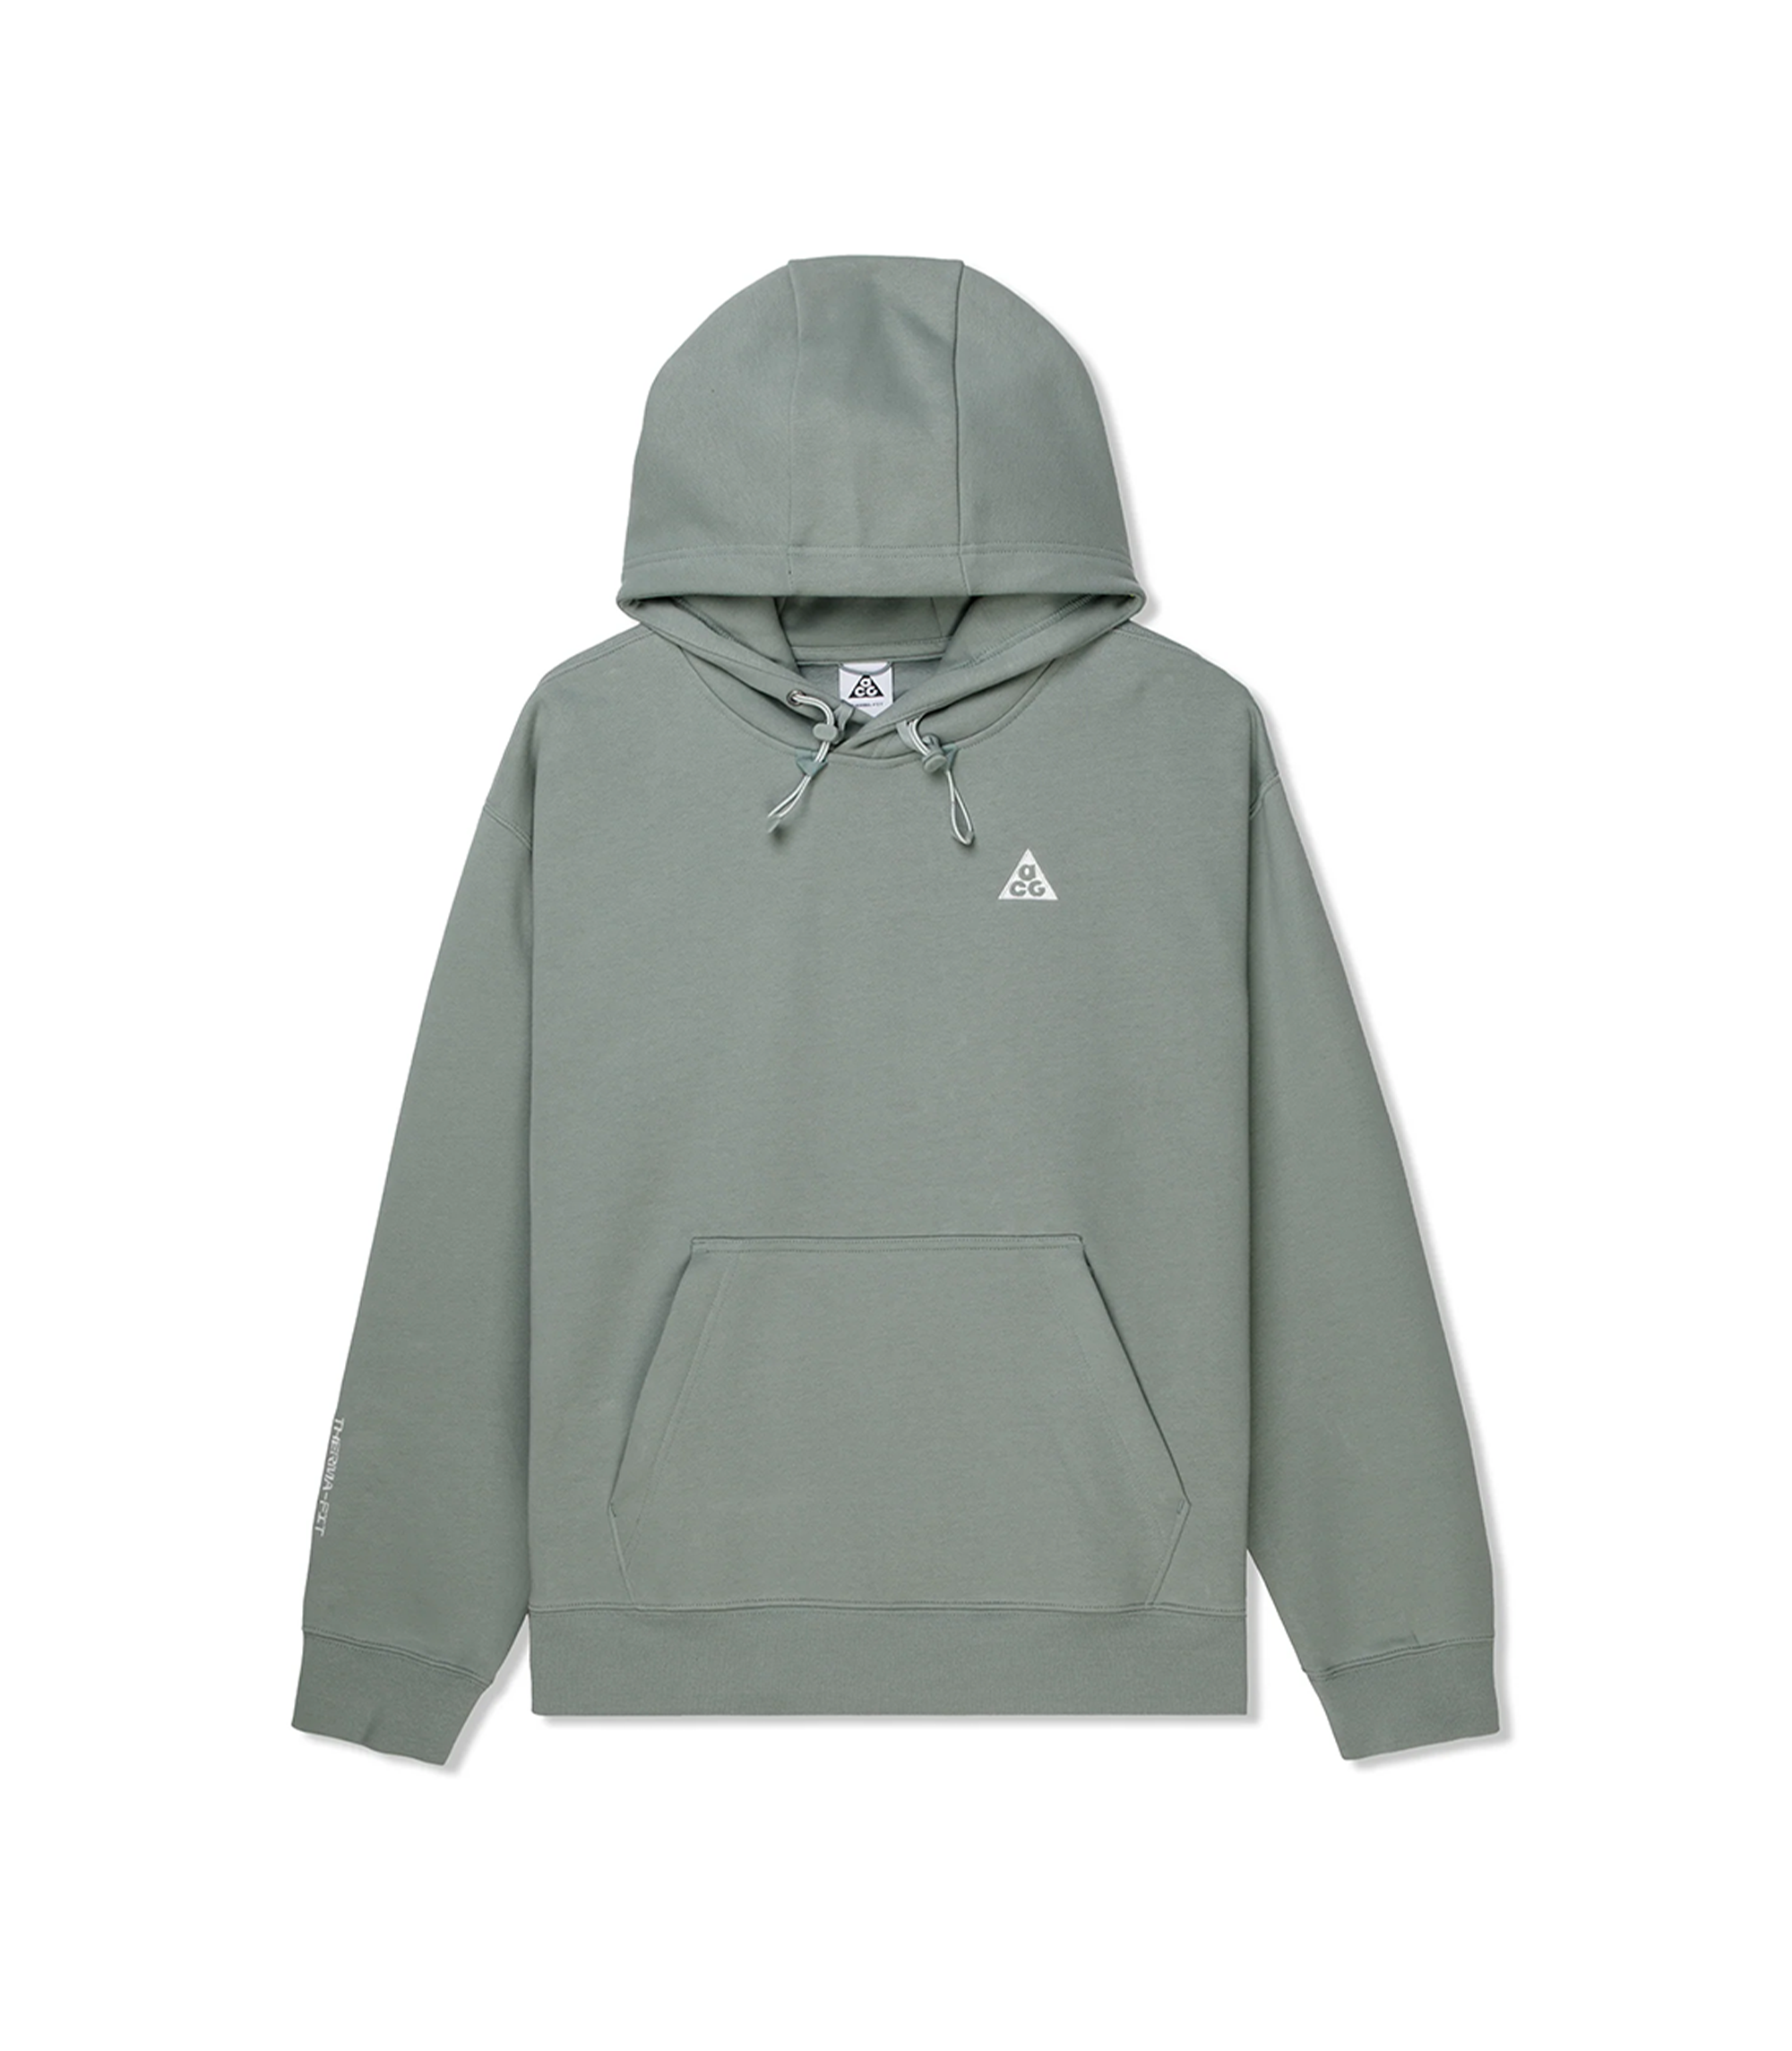 Therma-Fit Fleece Hoodie - Mica Green / Light Silver / Summit White